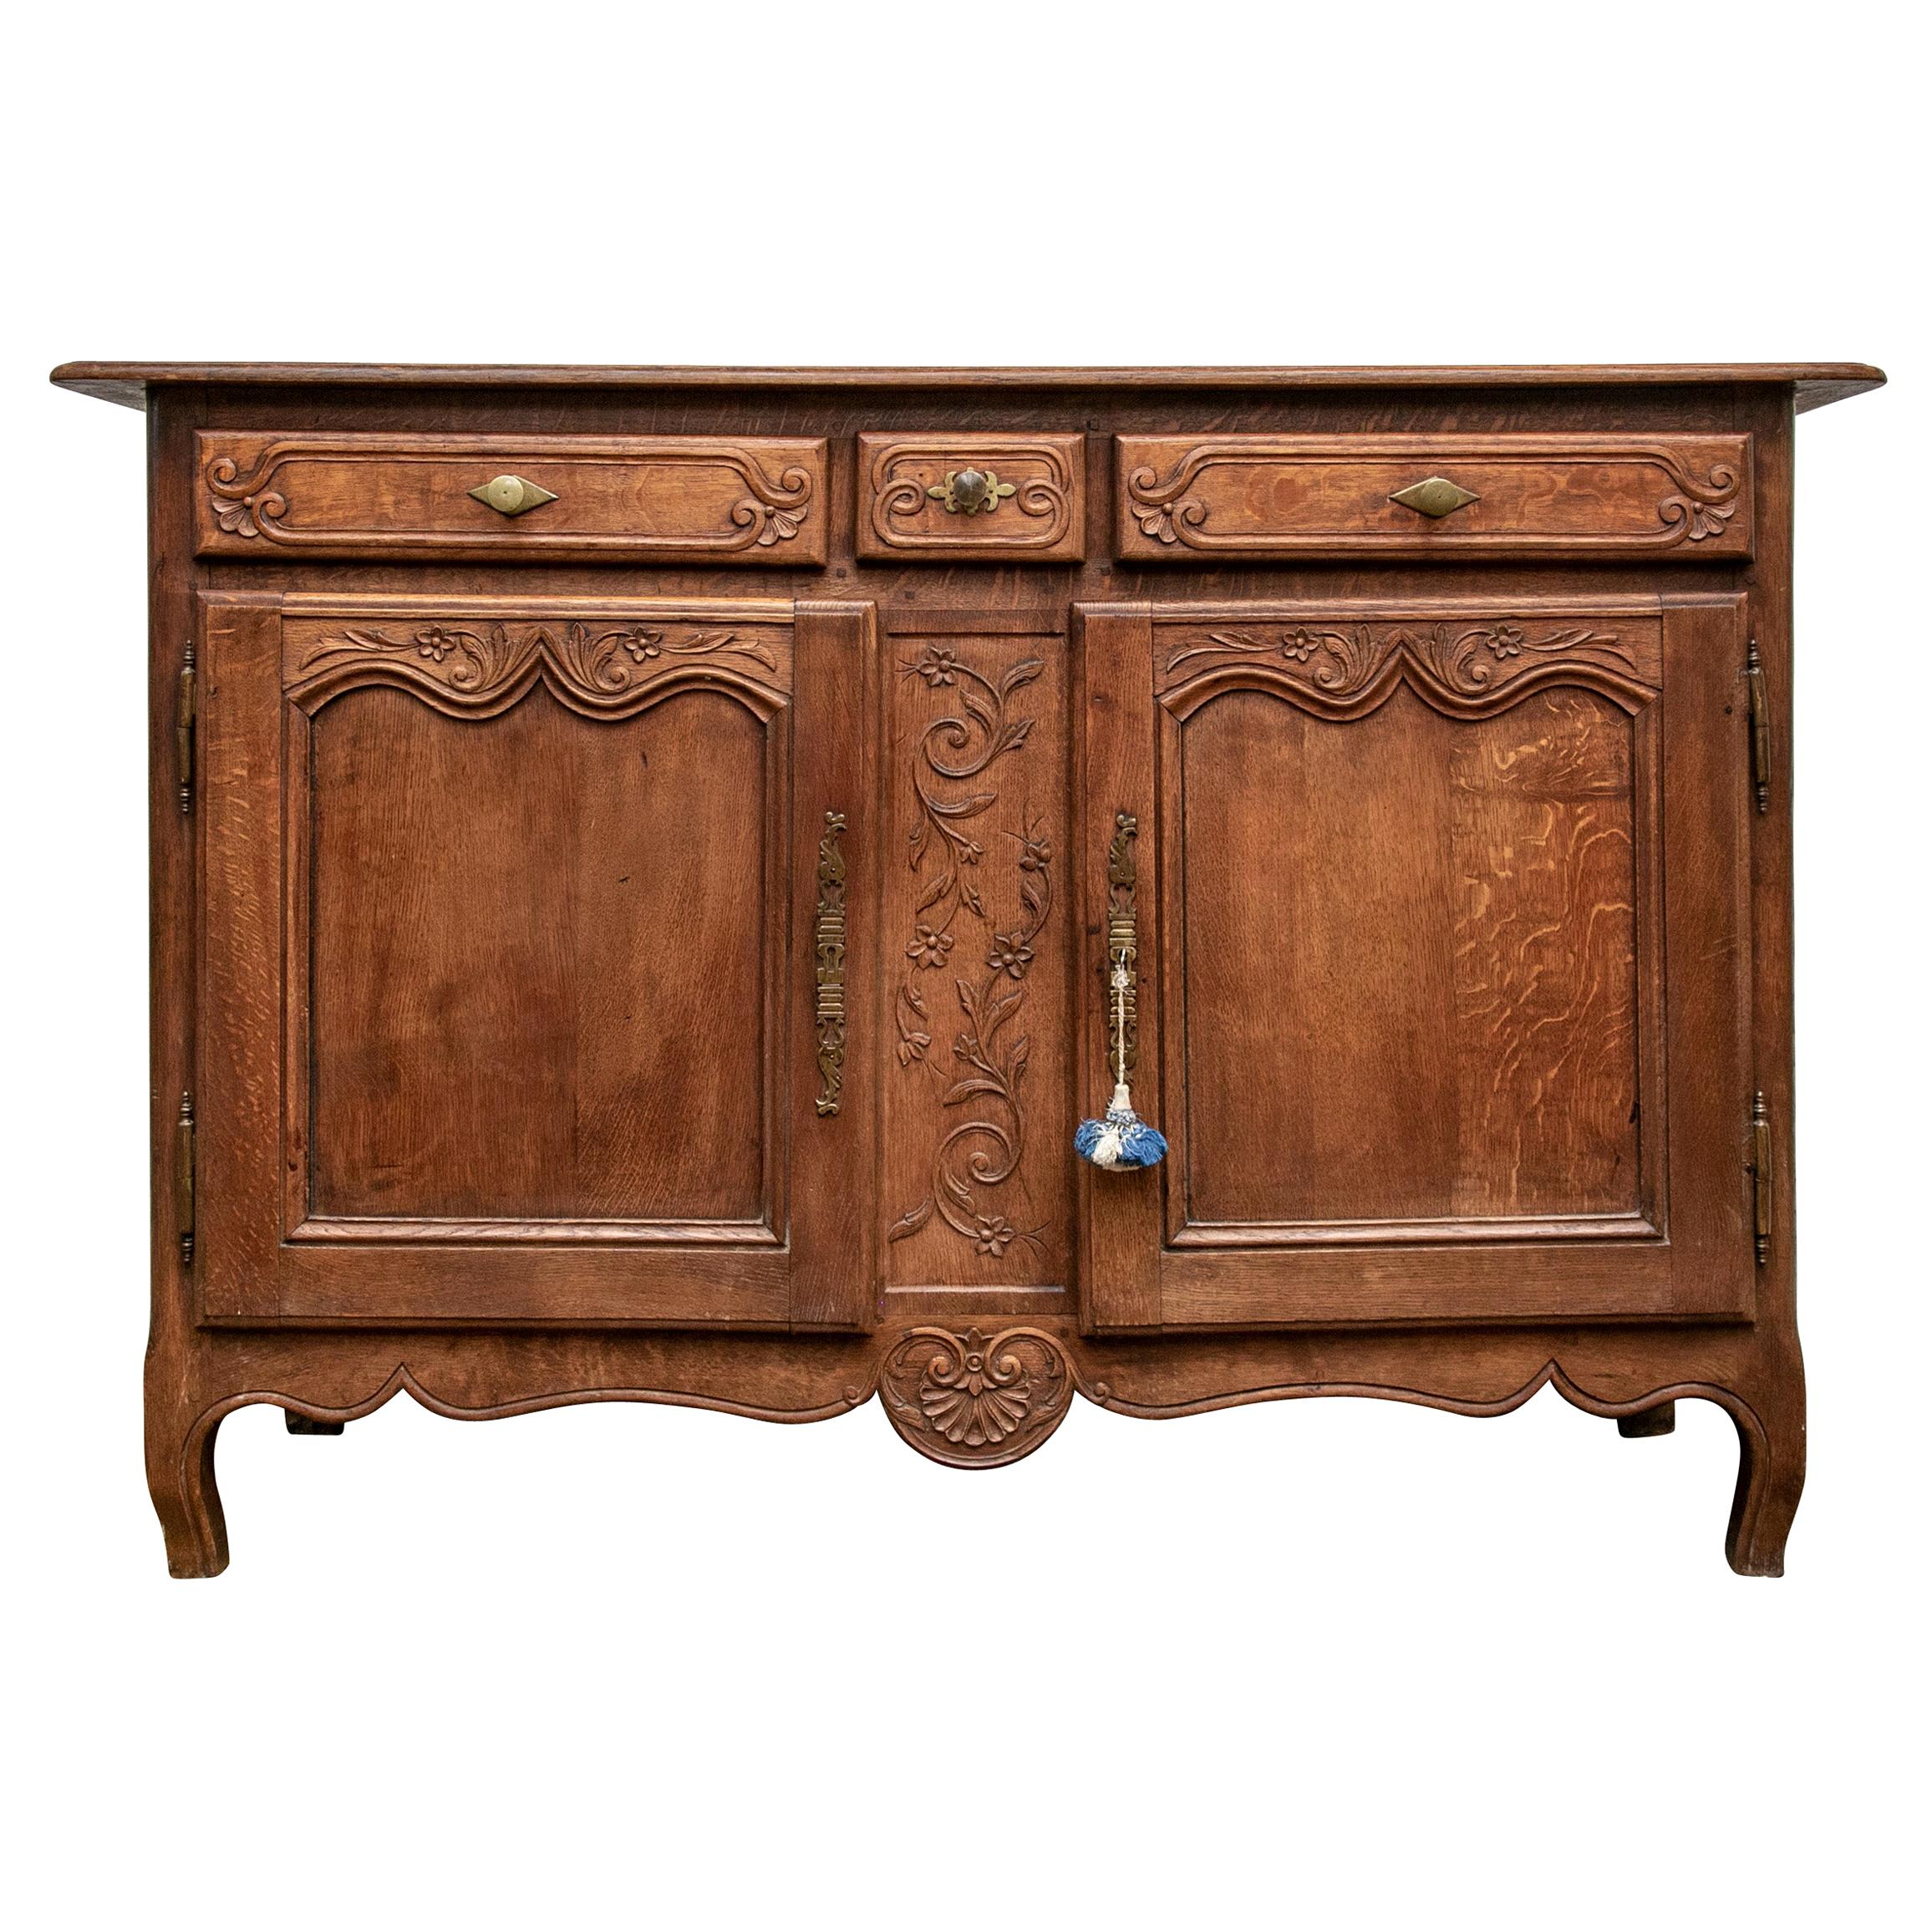 Late 18th-Early 19th Century French Carved Oak Buffett